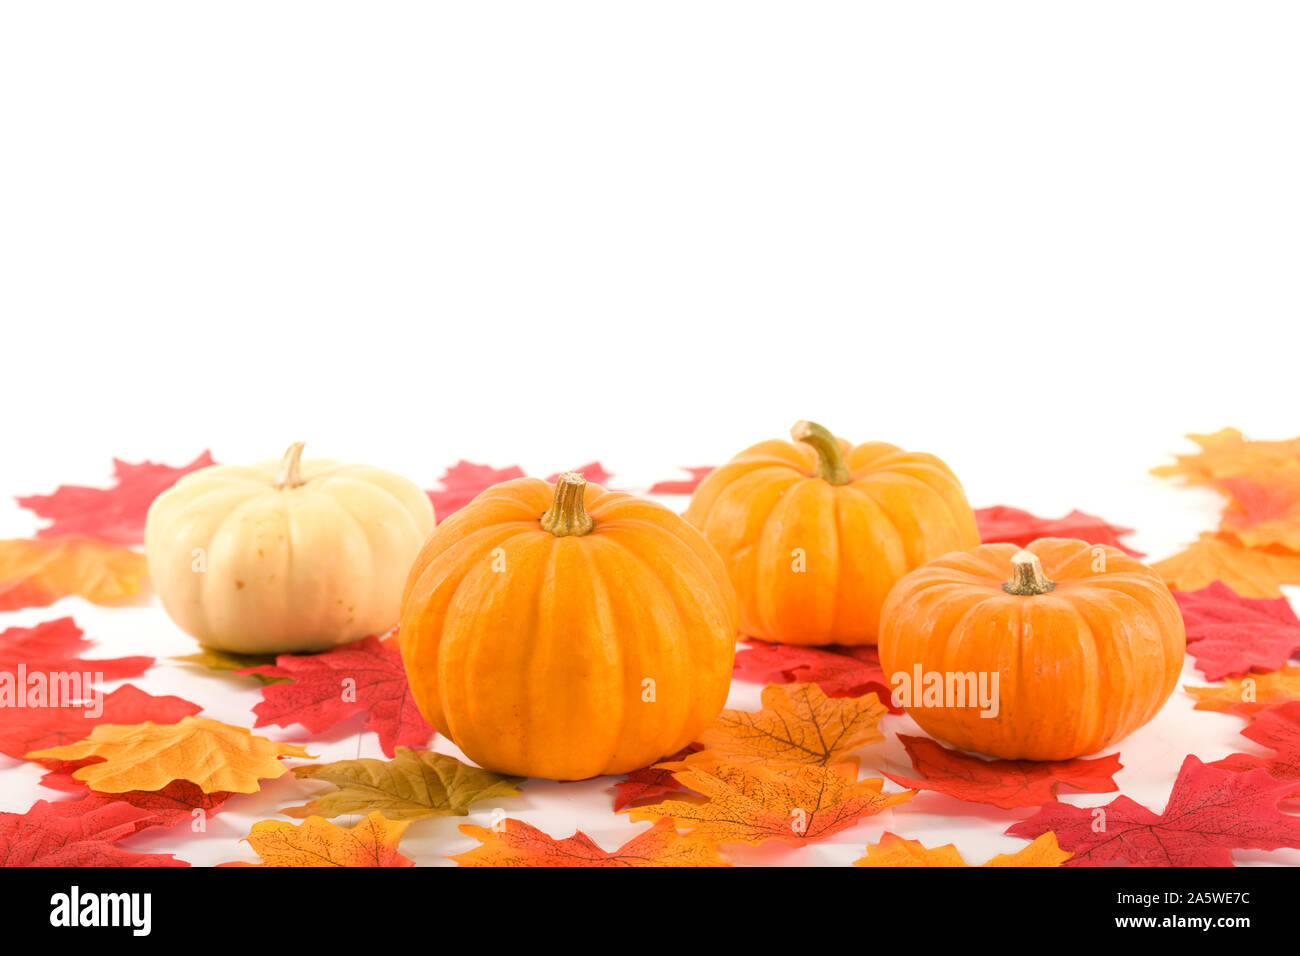 Four Pumpkins with bright coloured leaves Stock Photo